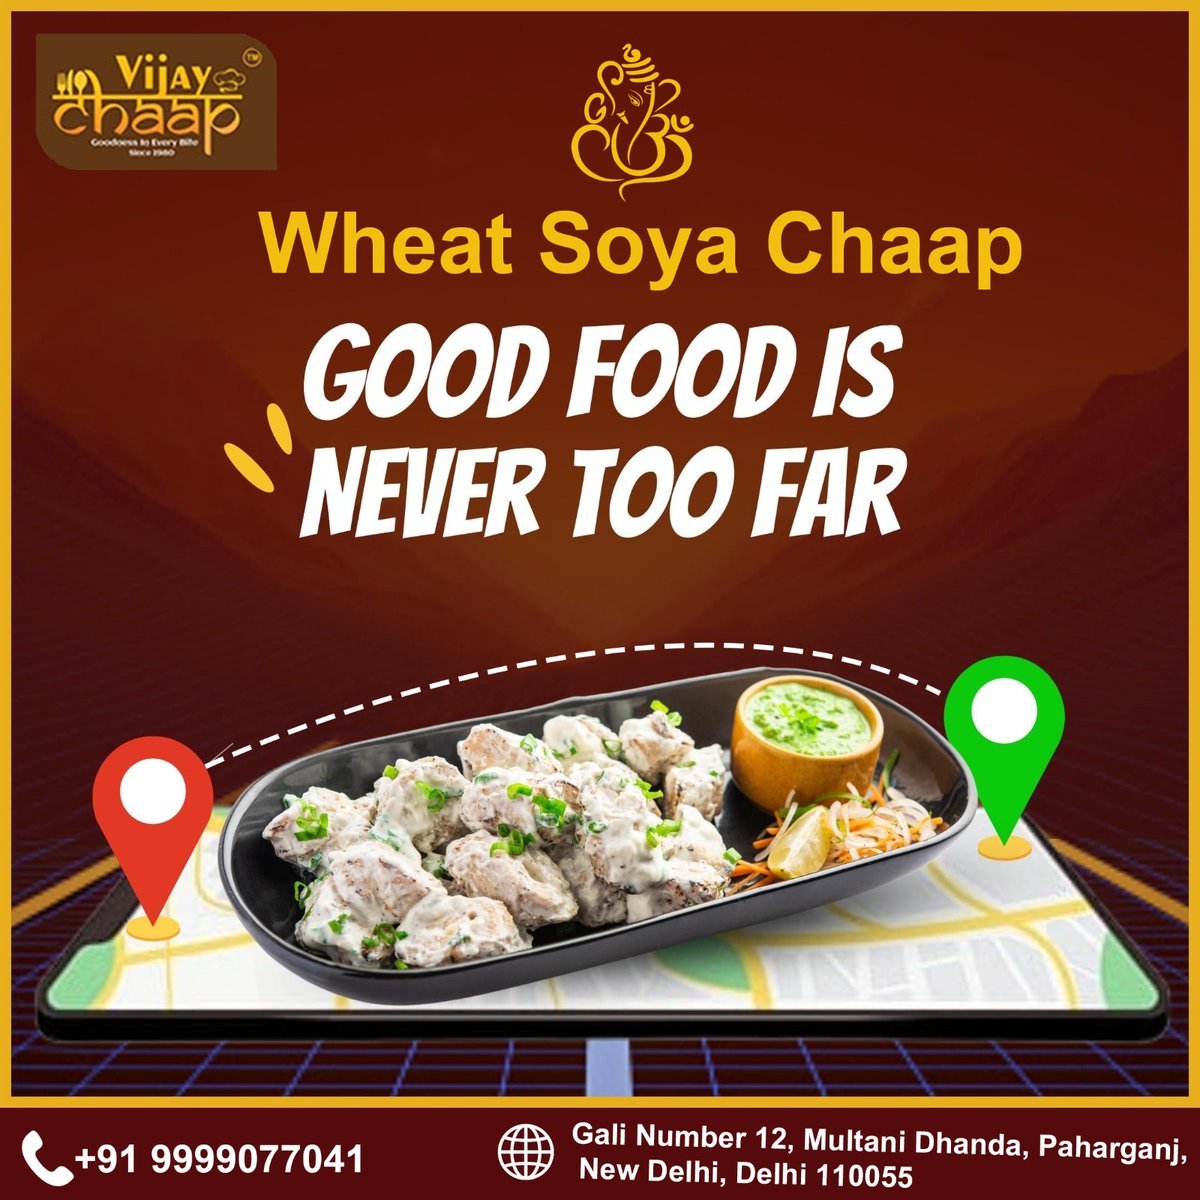 For Any Query:
☎️ Call: +91 99990 77041
📨 Email: vijaychaapcorner@gmail.com
📍 Address: Gali Number 12, Multani Dhanda, Paharganj, New Delhi-110055

#healthyfood #soyachaap #healthybreakfast #healthyrecipes #healthylifestyle #dieticien #nutrition #fitness #diet #Wheatchaap